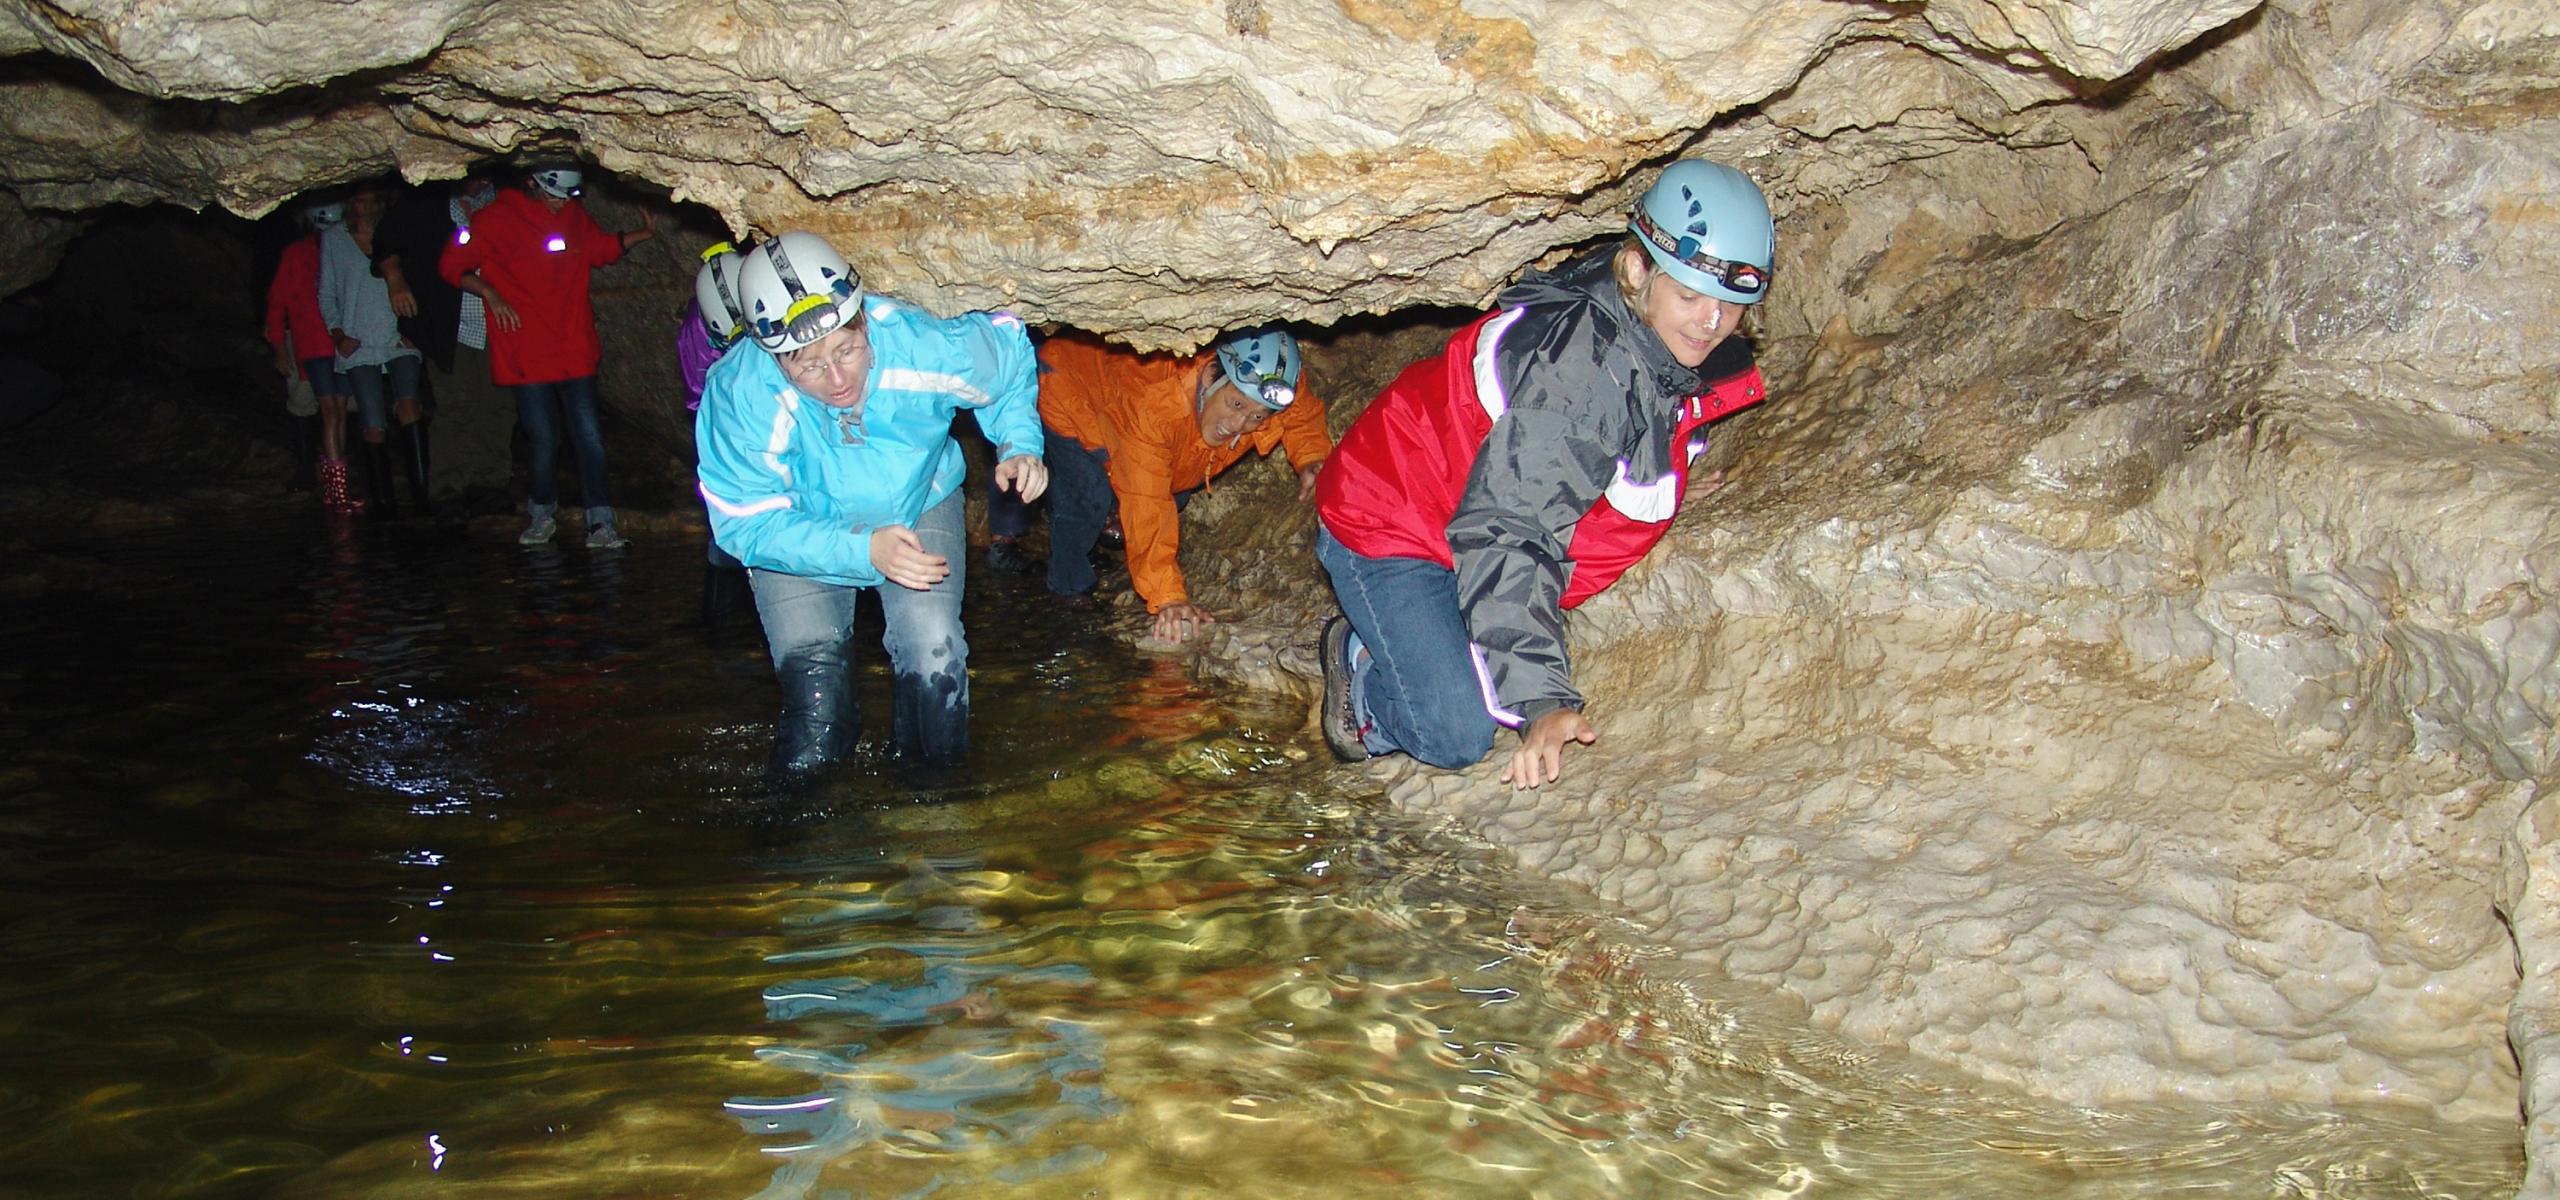 Children and adults press themselves along the cave wall